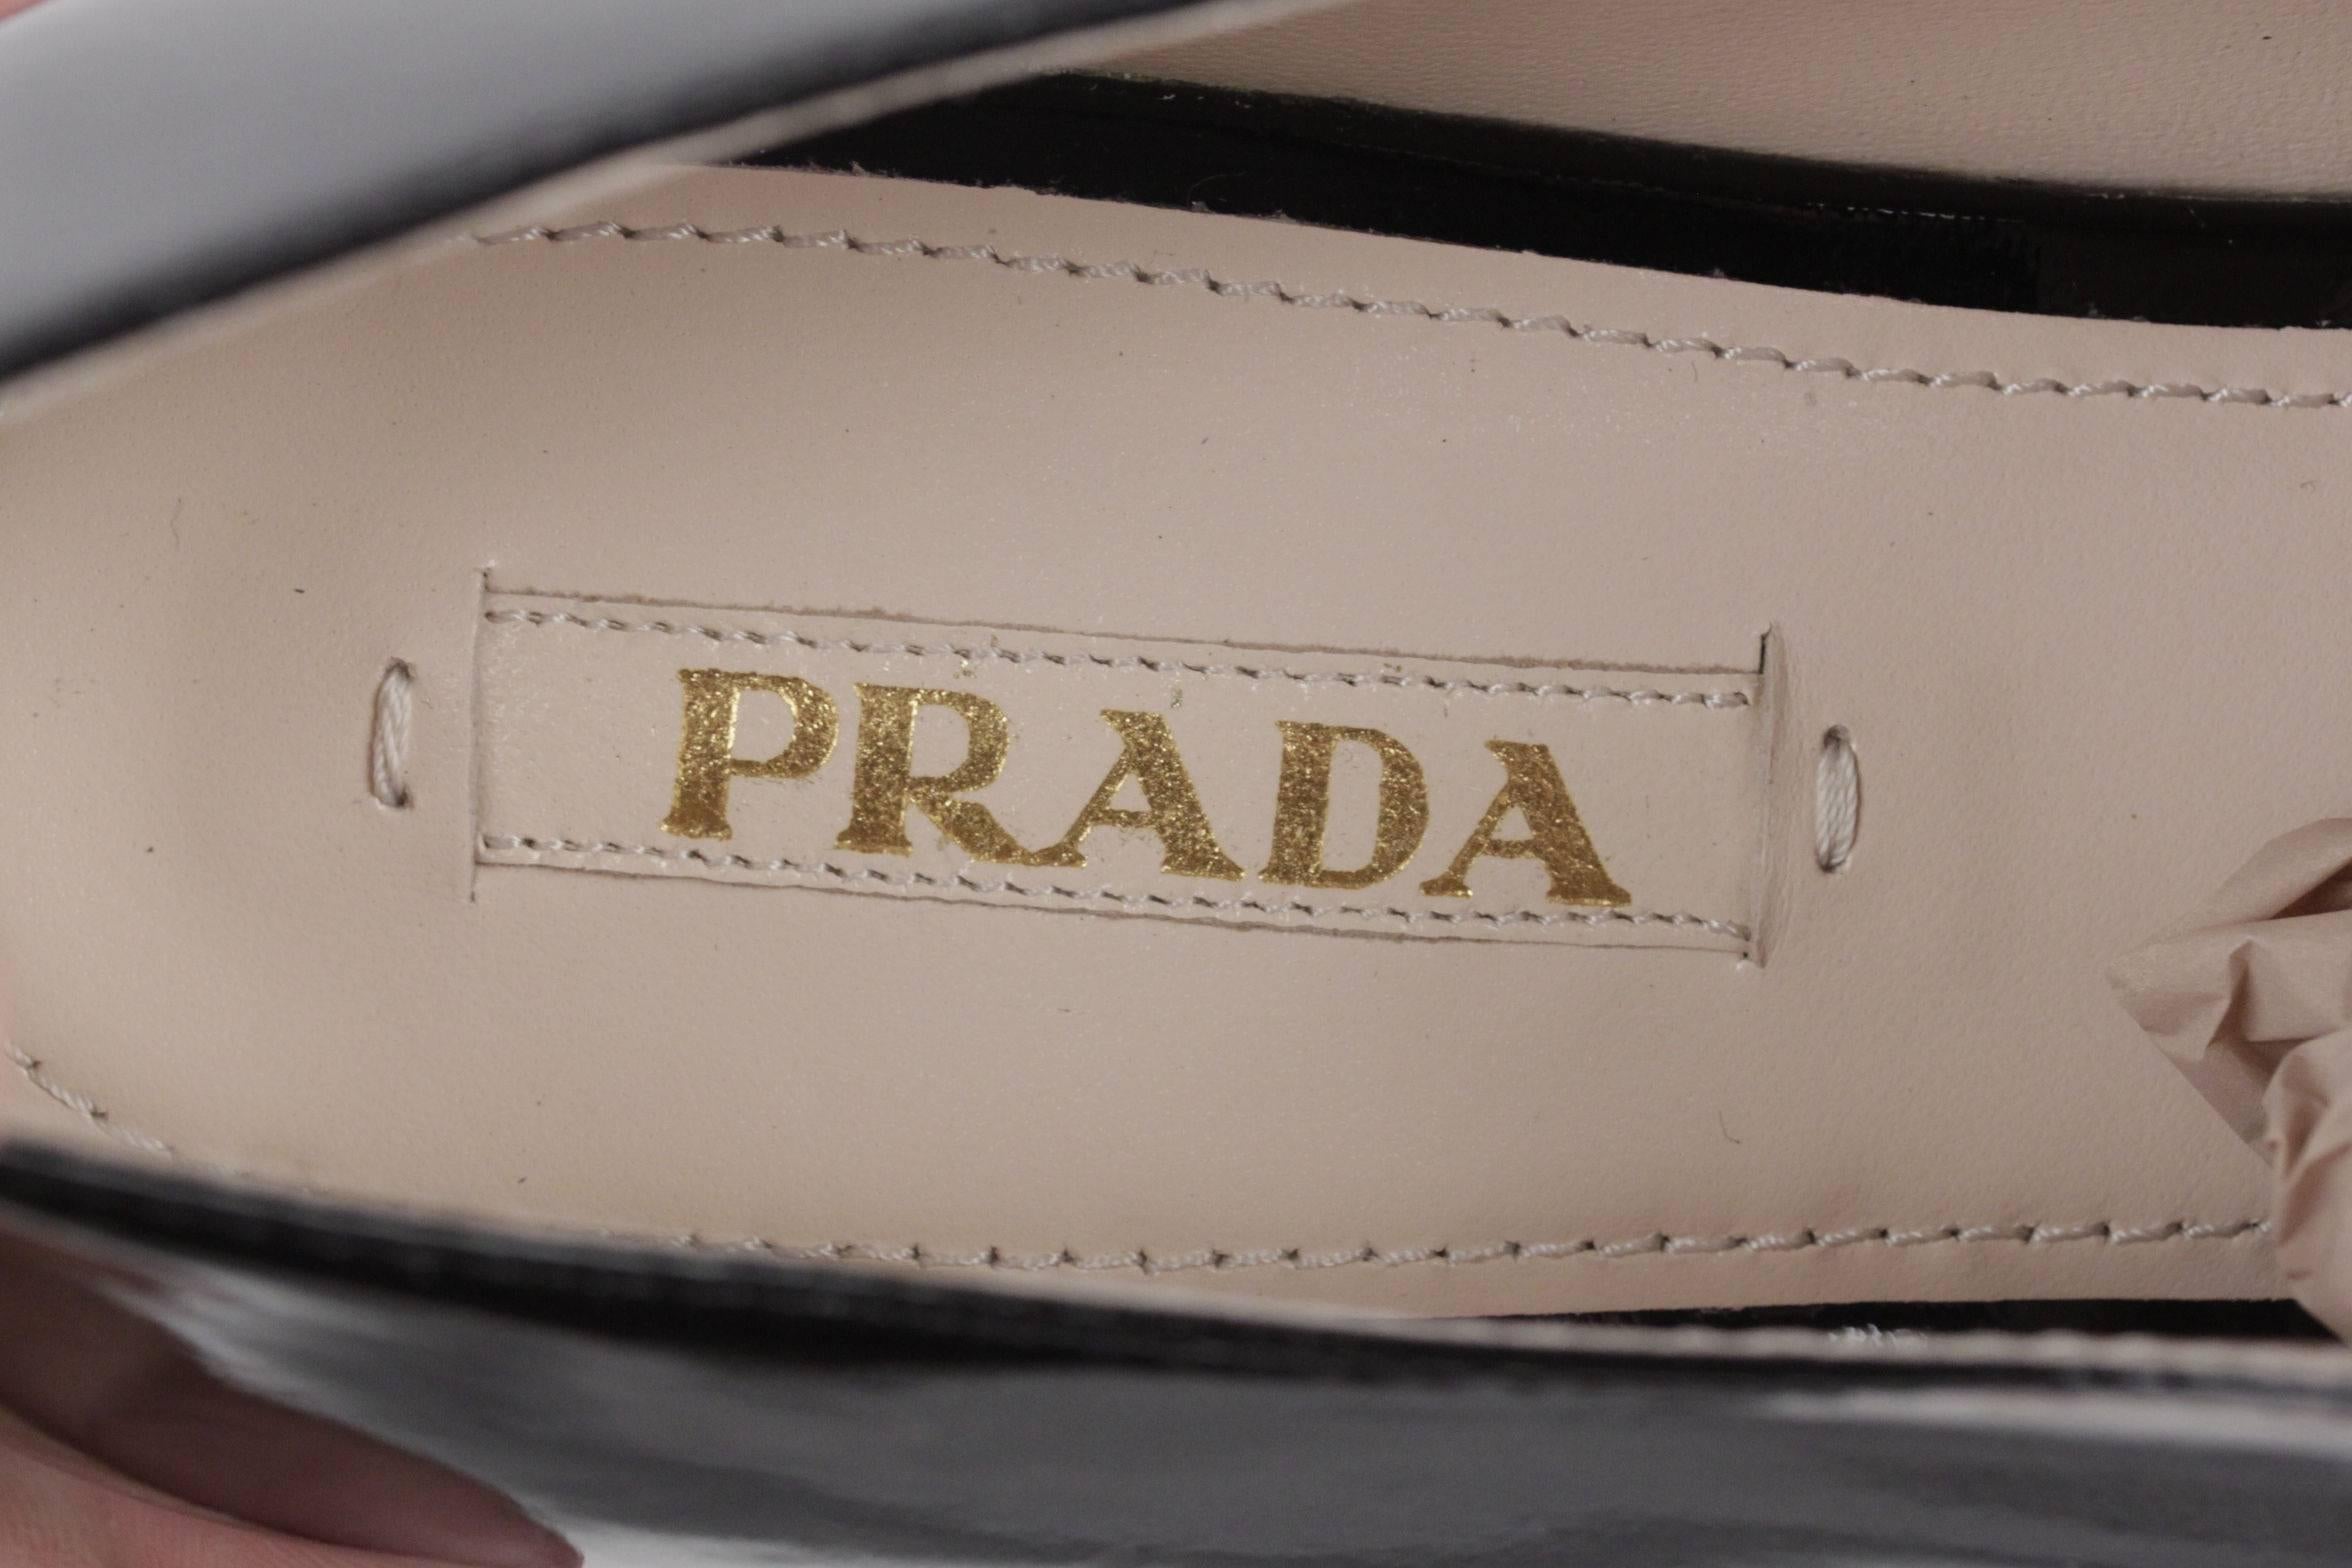 PRADA Black Patent Leather OXFORDS SHOES Lace Up 40 1/2 3